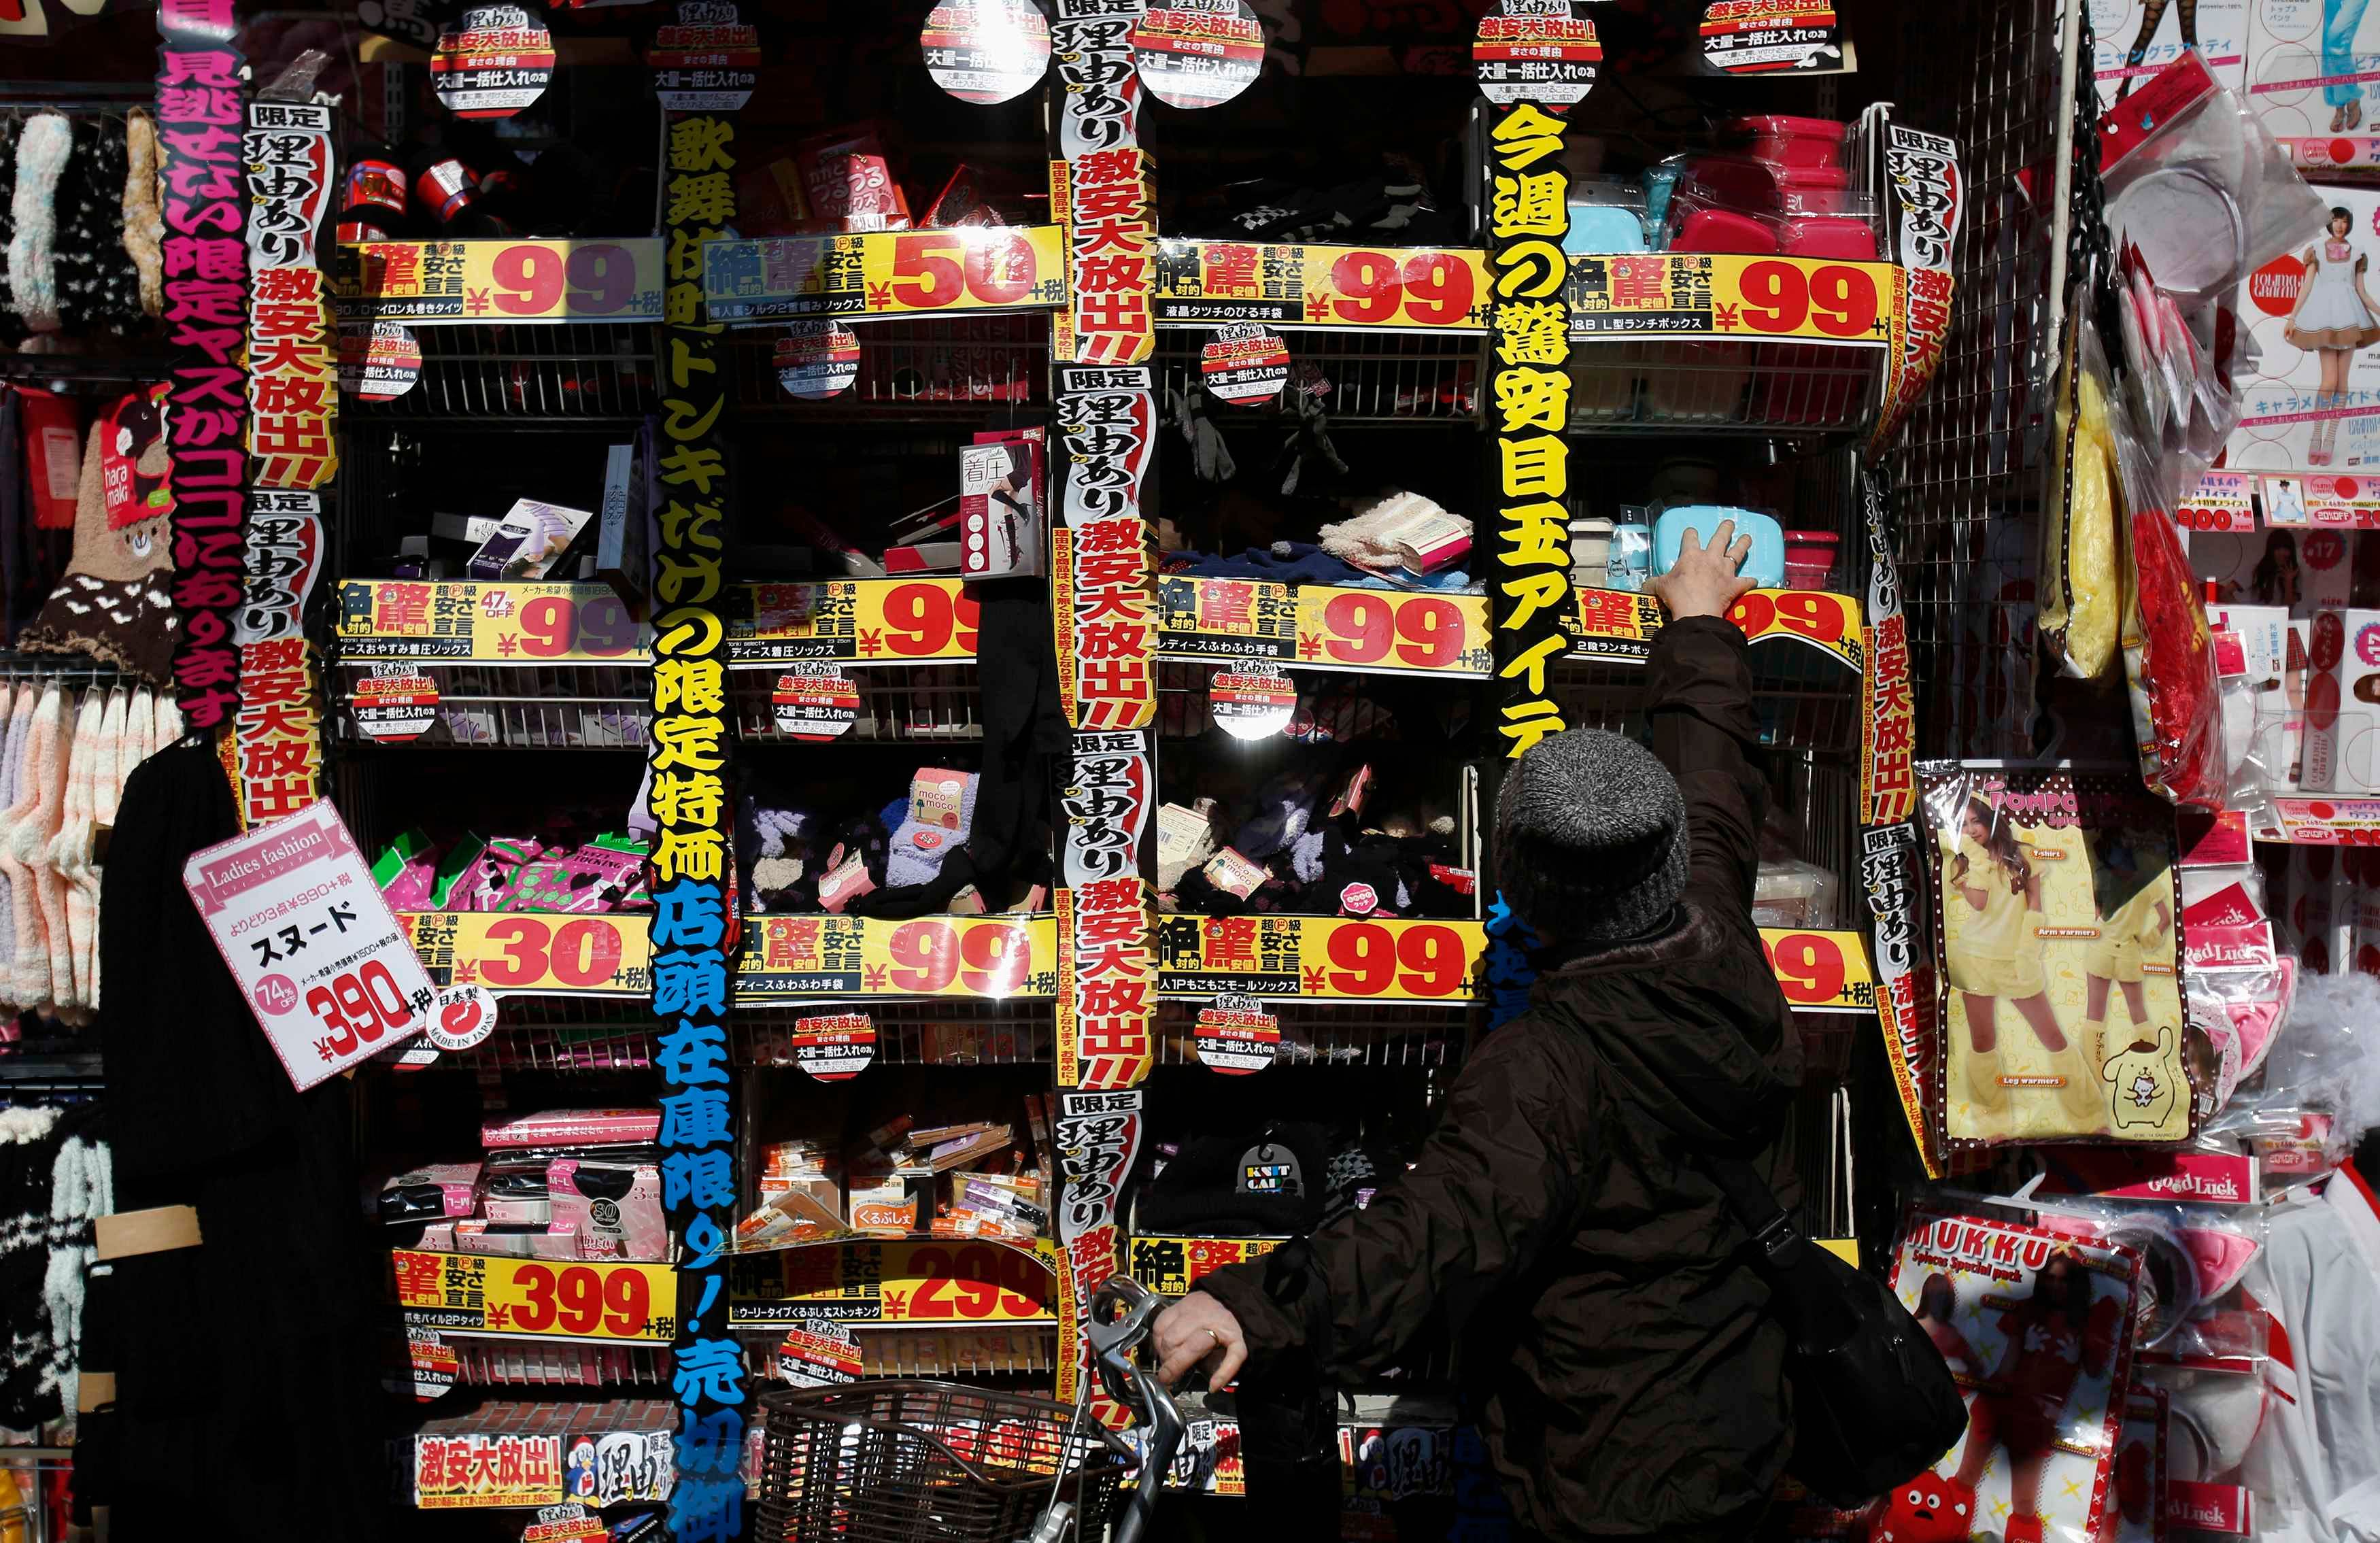 A woman reaches for an item displayed outside a discount store in Tokyo February 15, 2015. Japan's economy rebounded from recession to grow an annualised 2.2 percent in the final quarter of last year, giving a much-needed boost to premier Shinzo Abe's efforts to shake off decades of stagnation even as the global outlook deteriorates. Photo: Reuters